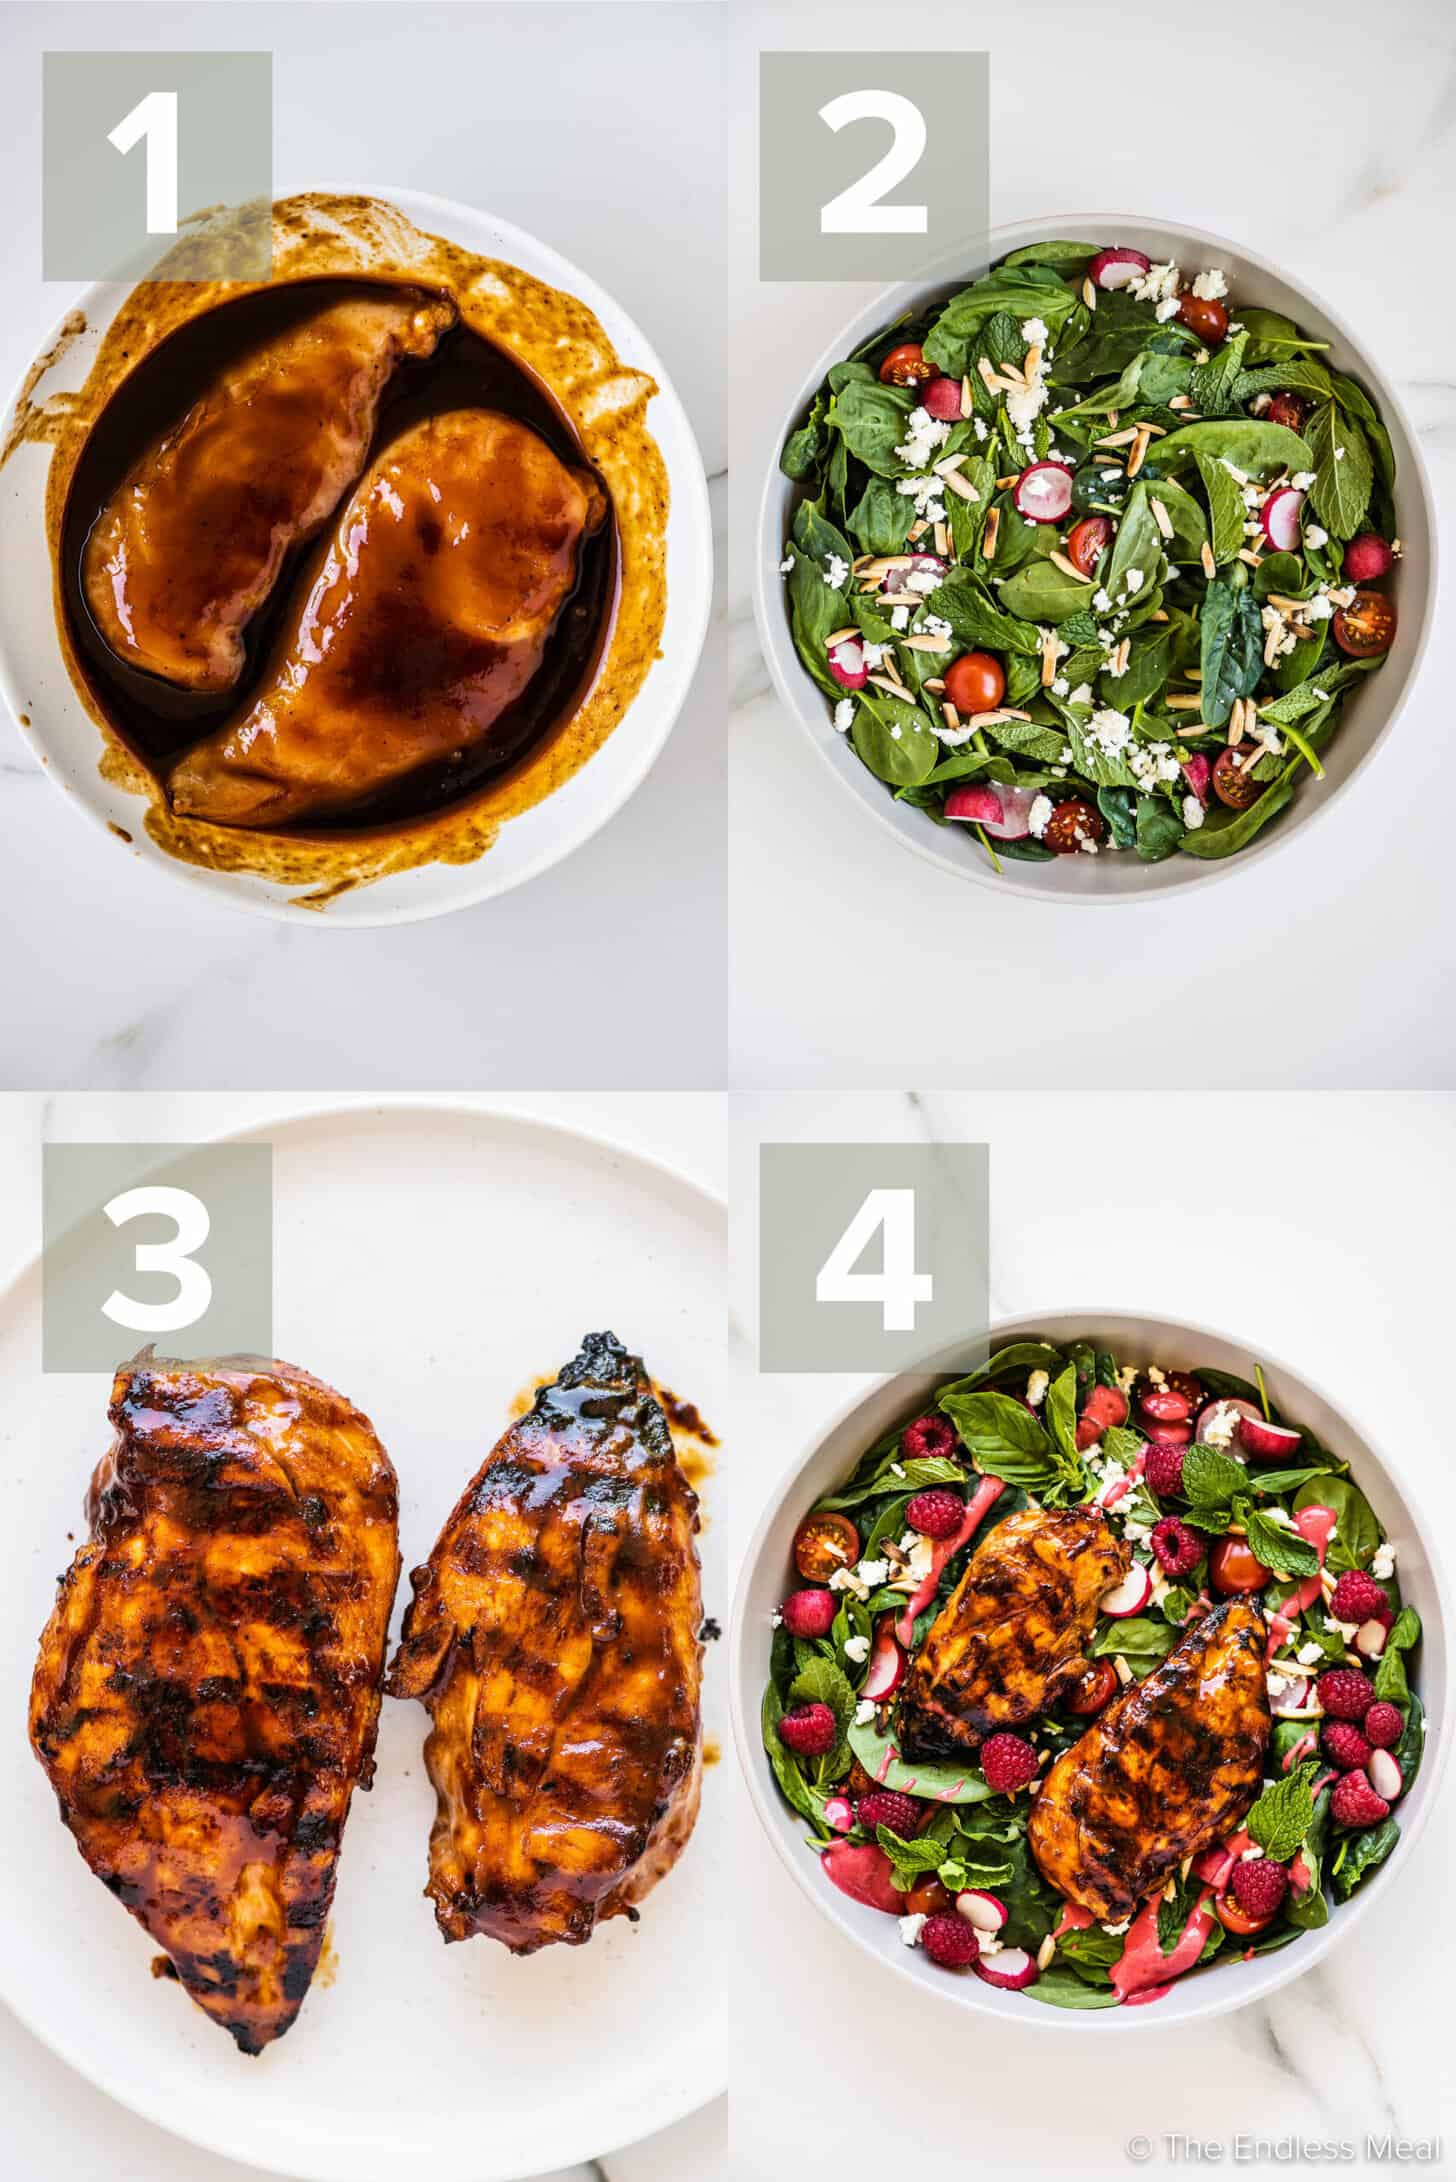 4 pictures showing how to make Summer Chicken Salad